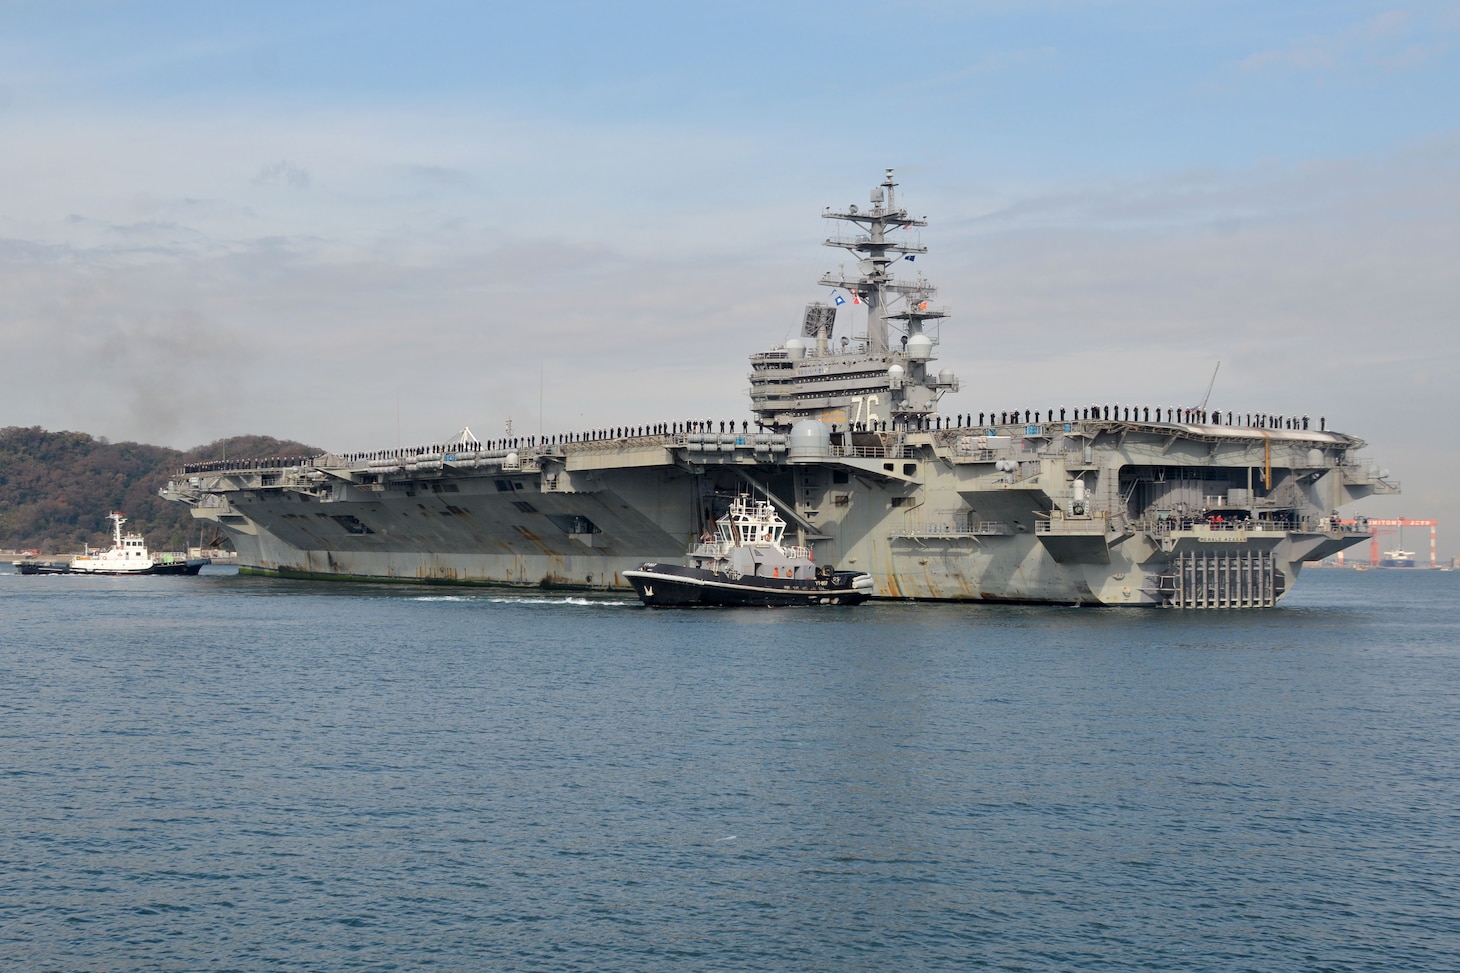 The U.S. Navy’s forward-deployed aircraft carrier USS Ronald Reagan (CVN 76) returns to Fleet Activities (FLEACT) Yokosuka following its 2017 patrol. FLEACT Yokosuka provides, maintains, and operates base facilities and services in support of 7th Fleet’s forward-deployed naval forces, 71 tenant commands, and 24,000 military and civilian personnel.